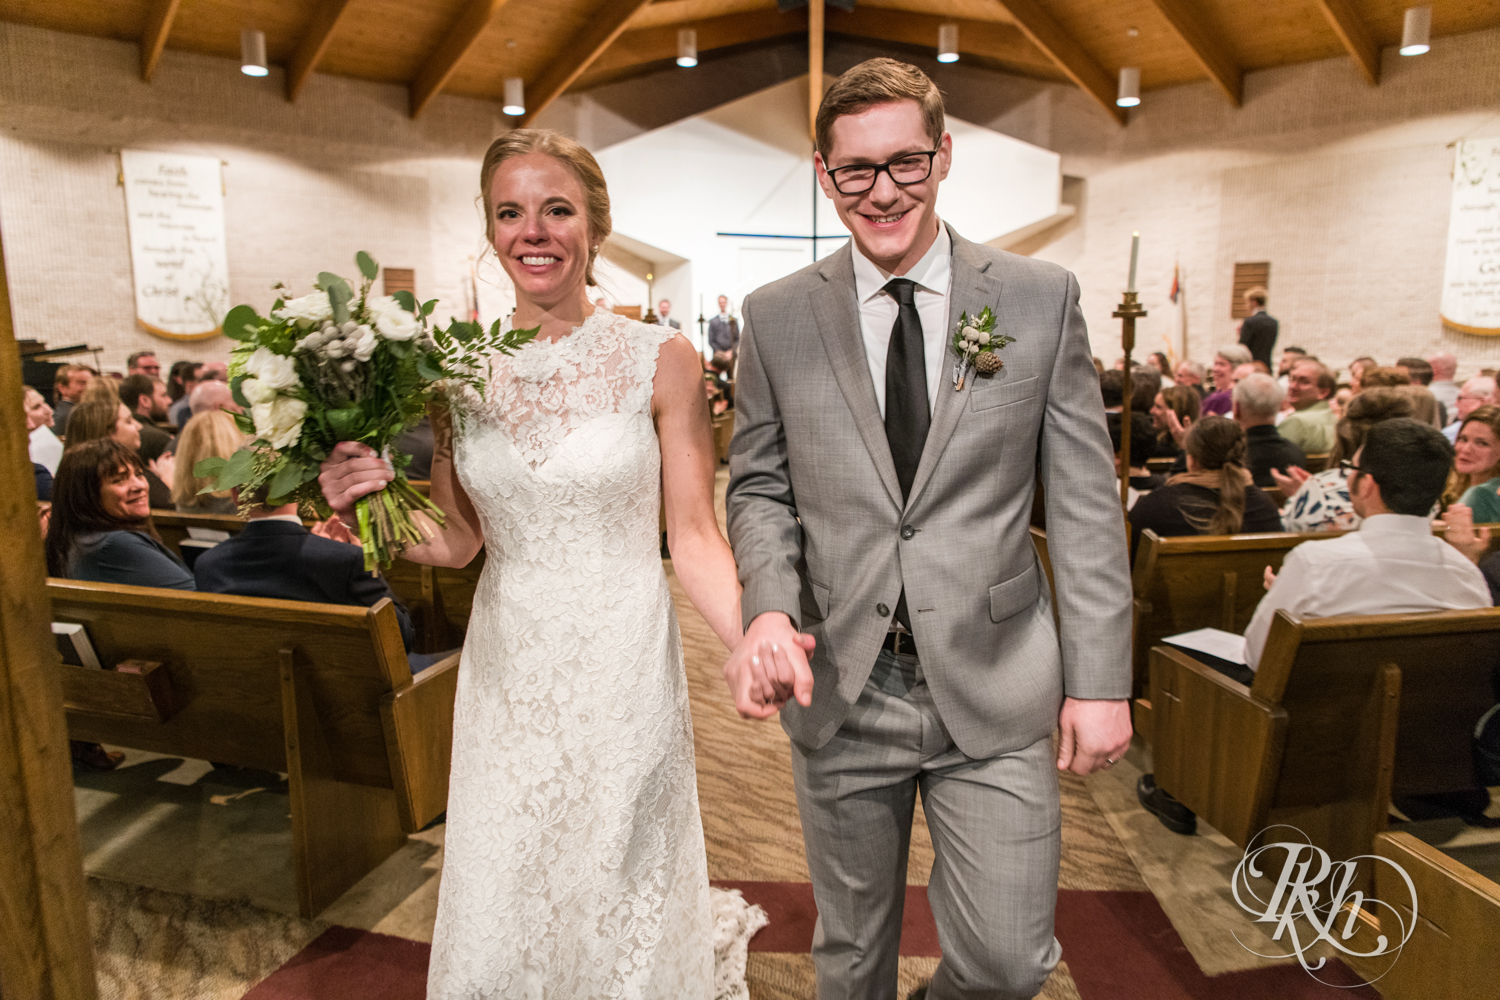 Bride and groom walk down aisle after church wedding ceremony in Golden Valley, Minnesota.